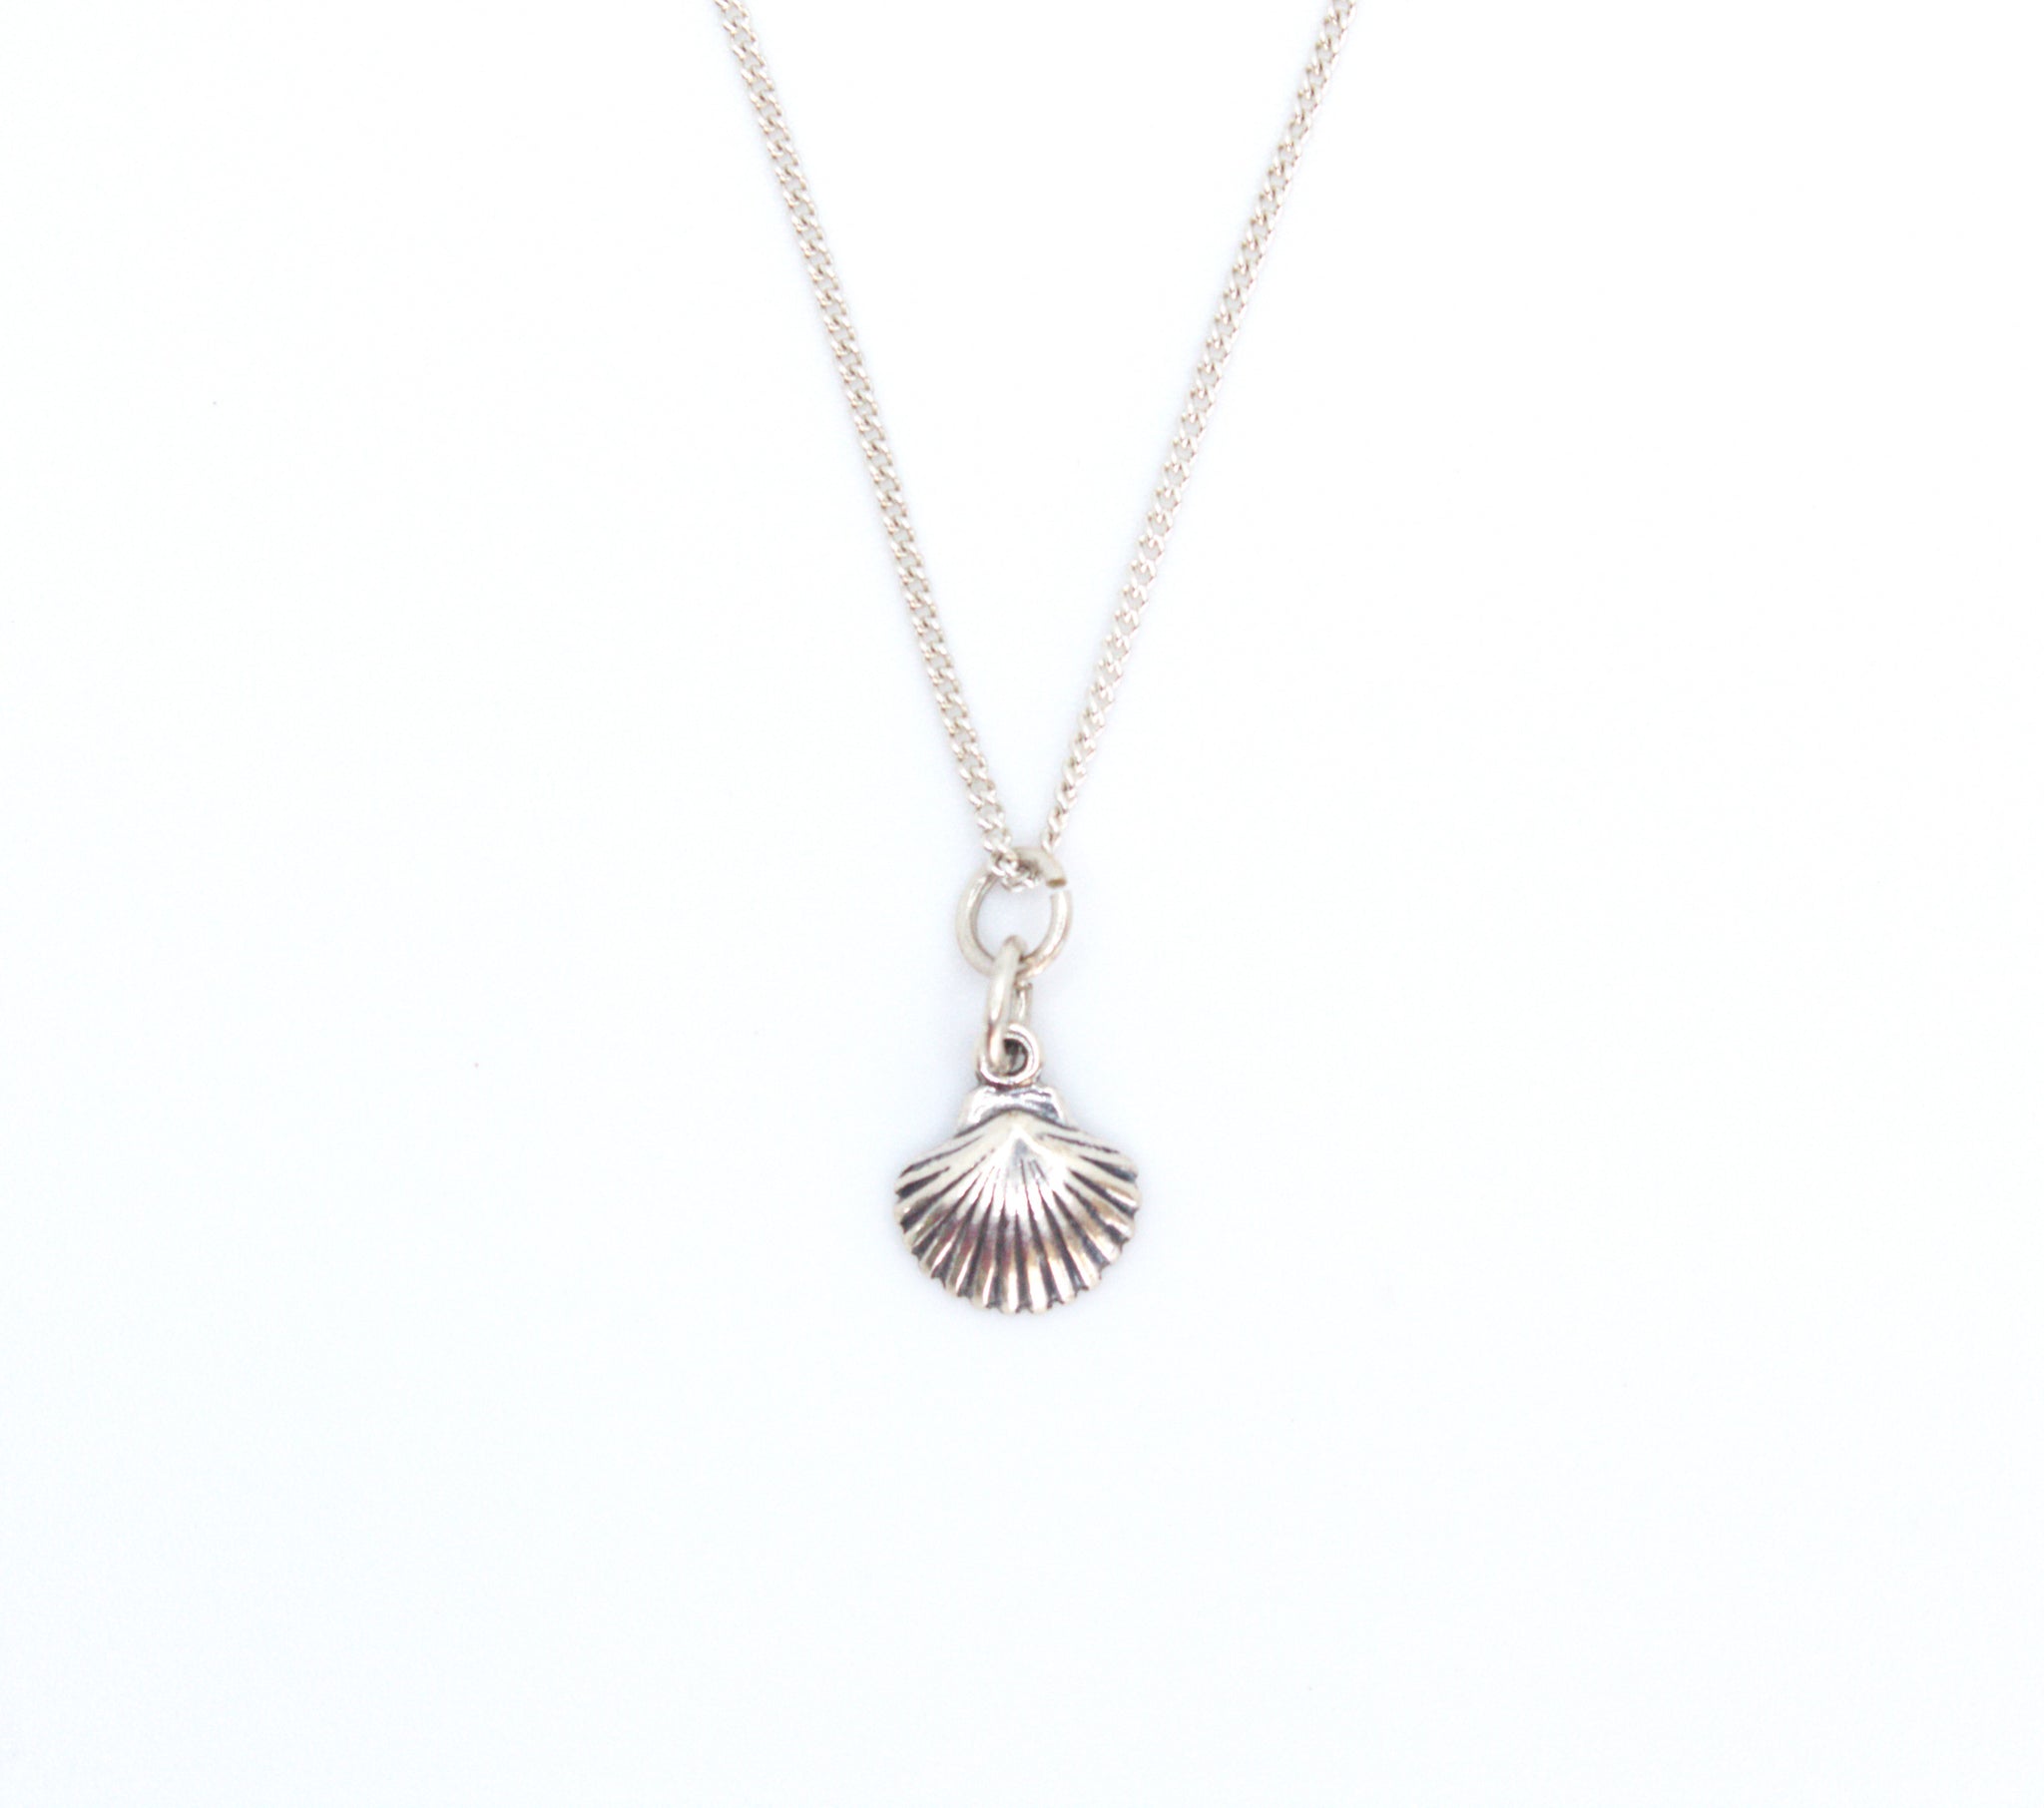 Sterling silver necklace with silver shell